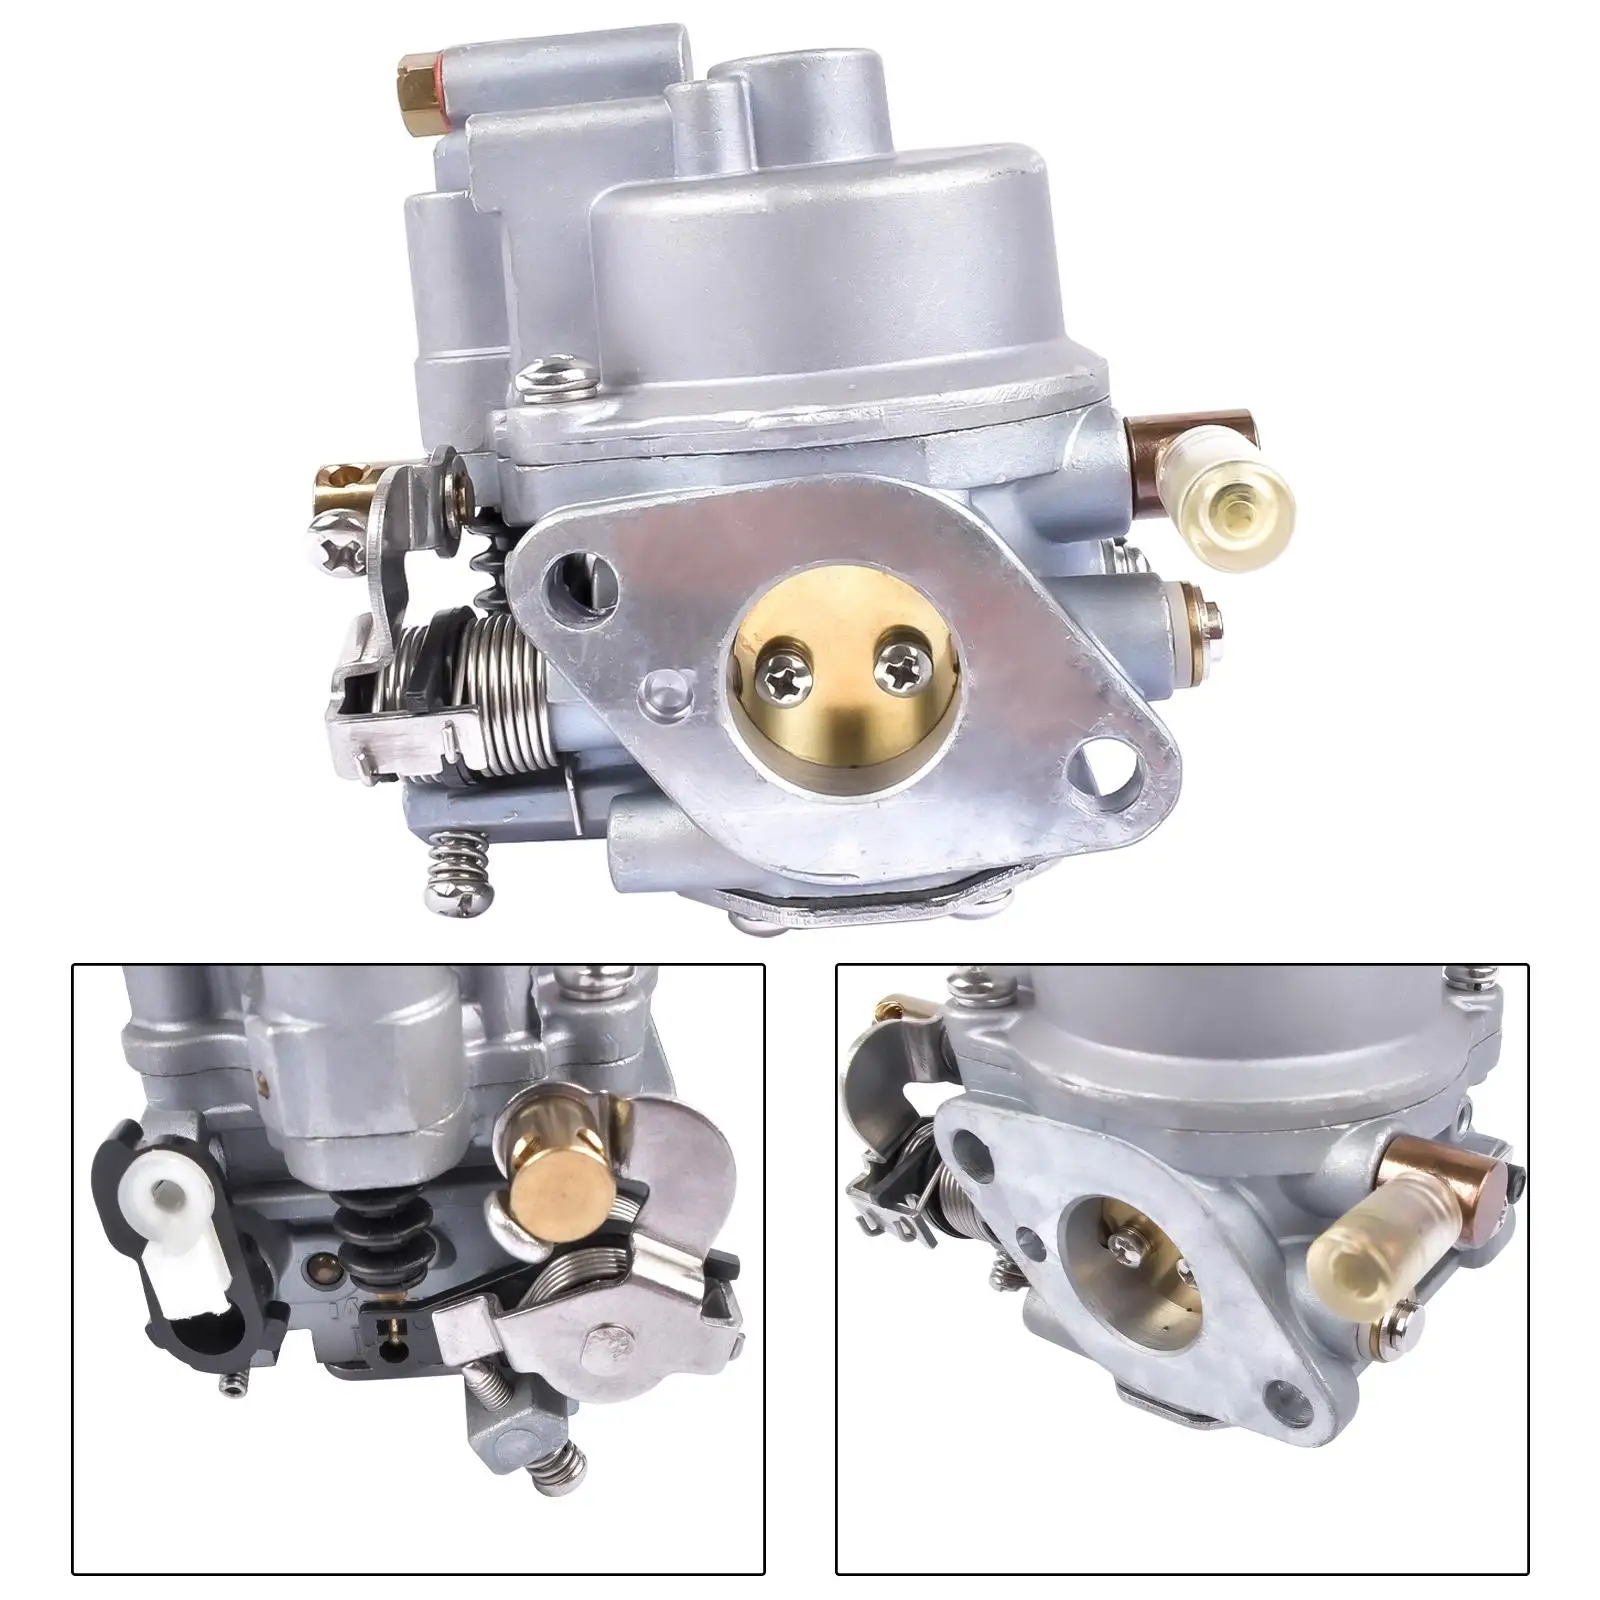 

AP02 Carburetor Assy 68T-14301-11-00 for Yamaha 4-Stroke 8HP 9.9HP F8M F9.9M Outboard